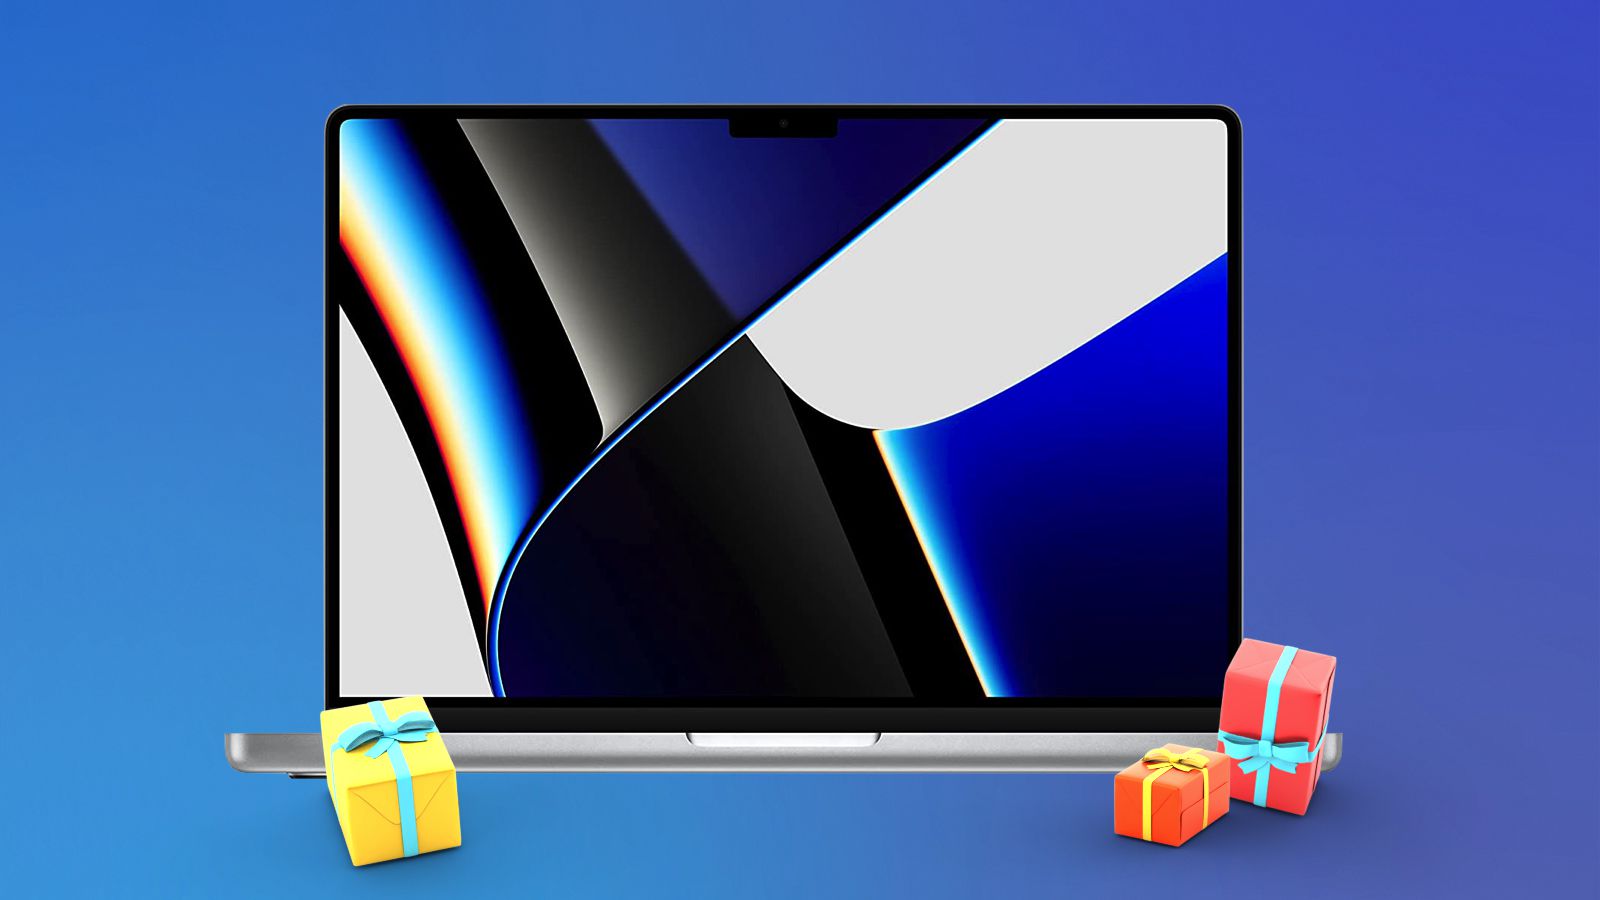 Deals: Get the Year's Best Prices on Apple's MacBook Pro at Up to $499 Off - macrumors.com